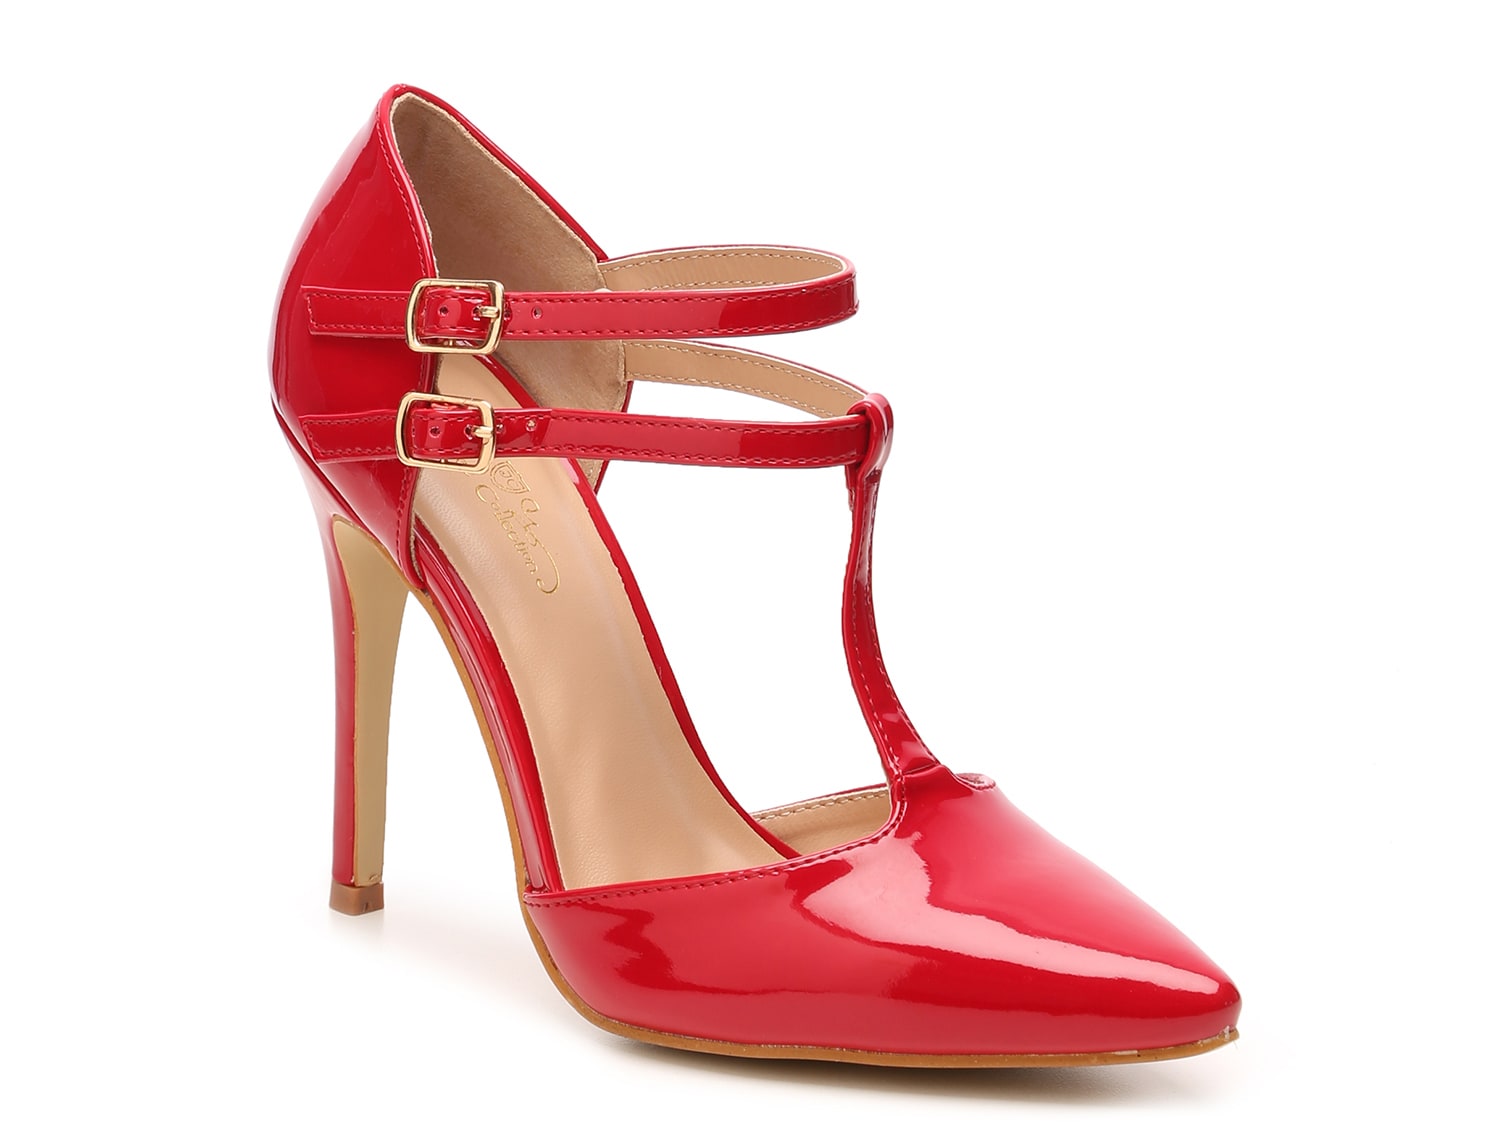 Journee Collection Tru Pump - Free Shipping | DSW